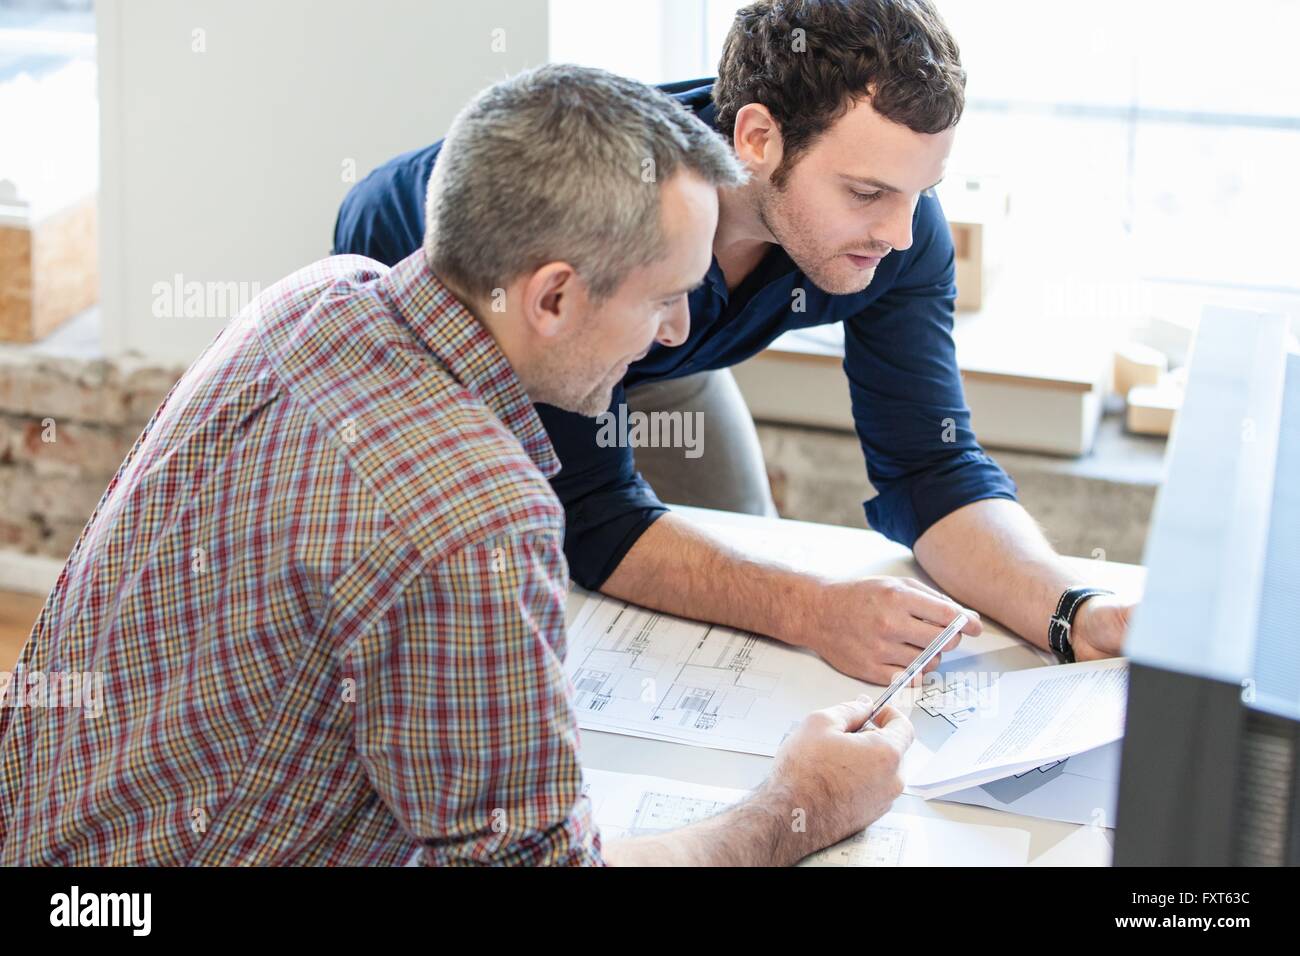 High angle view of men in office discussing paperwork Stock Photo